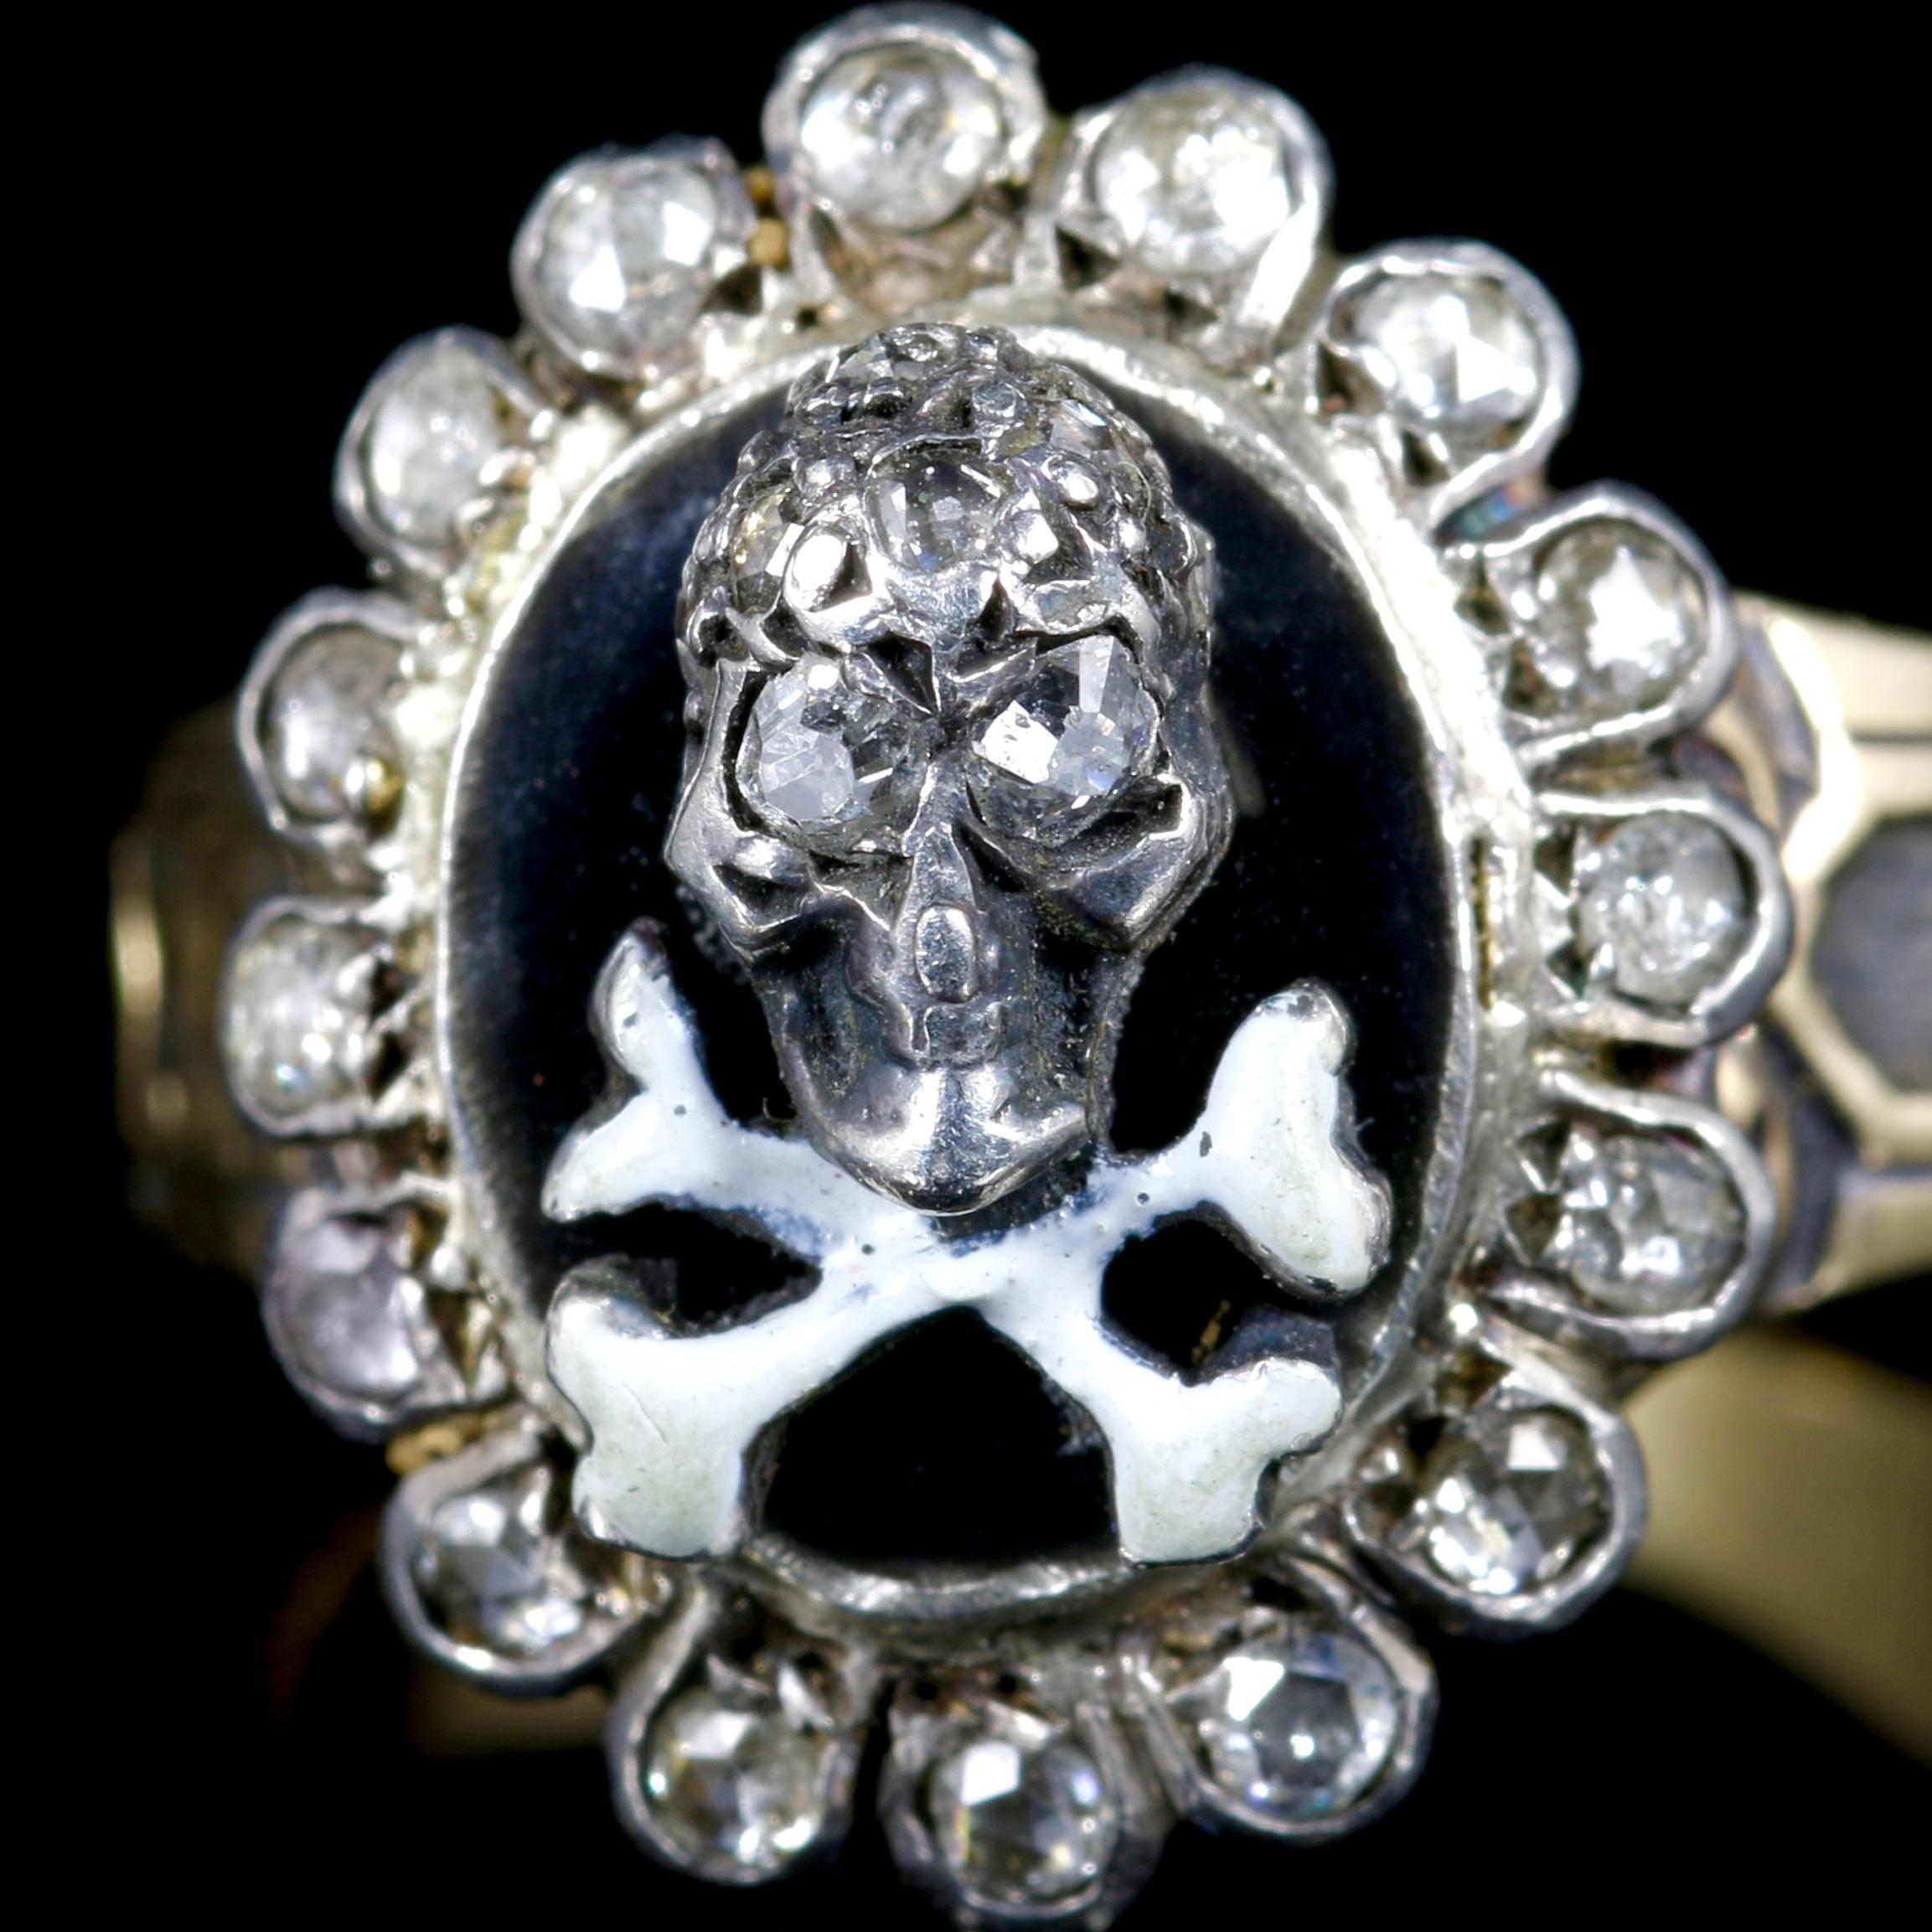 This 18ct Yellow Gold Memento Mori Diamond Skull and Crossbone ring is fabulous.

The skull and crossbones are surrounded by Diamonds in the outer gallery leading to an ornate gallery and shank.

Skull jewellery (Memento Mori) is very collectable.